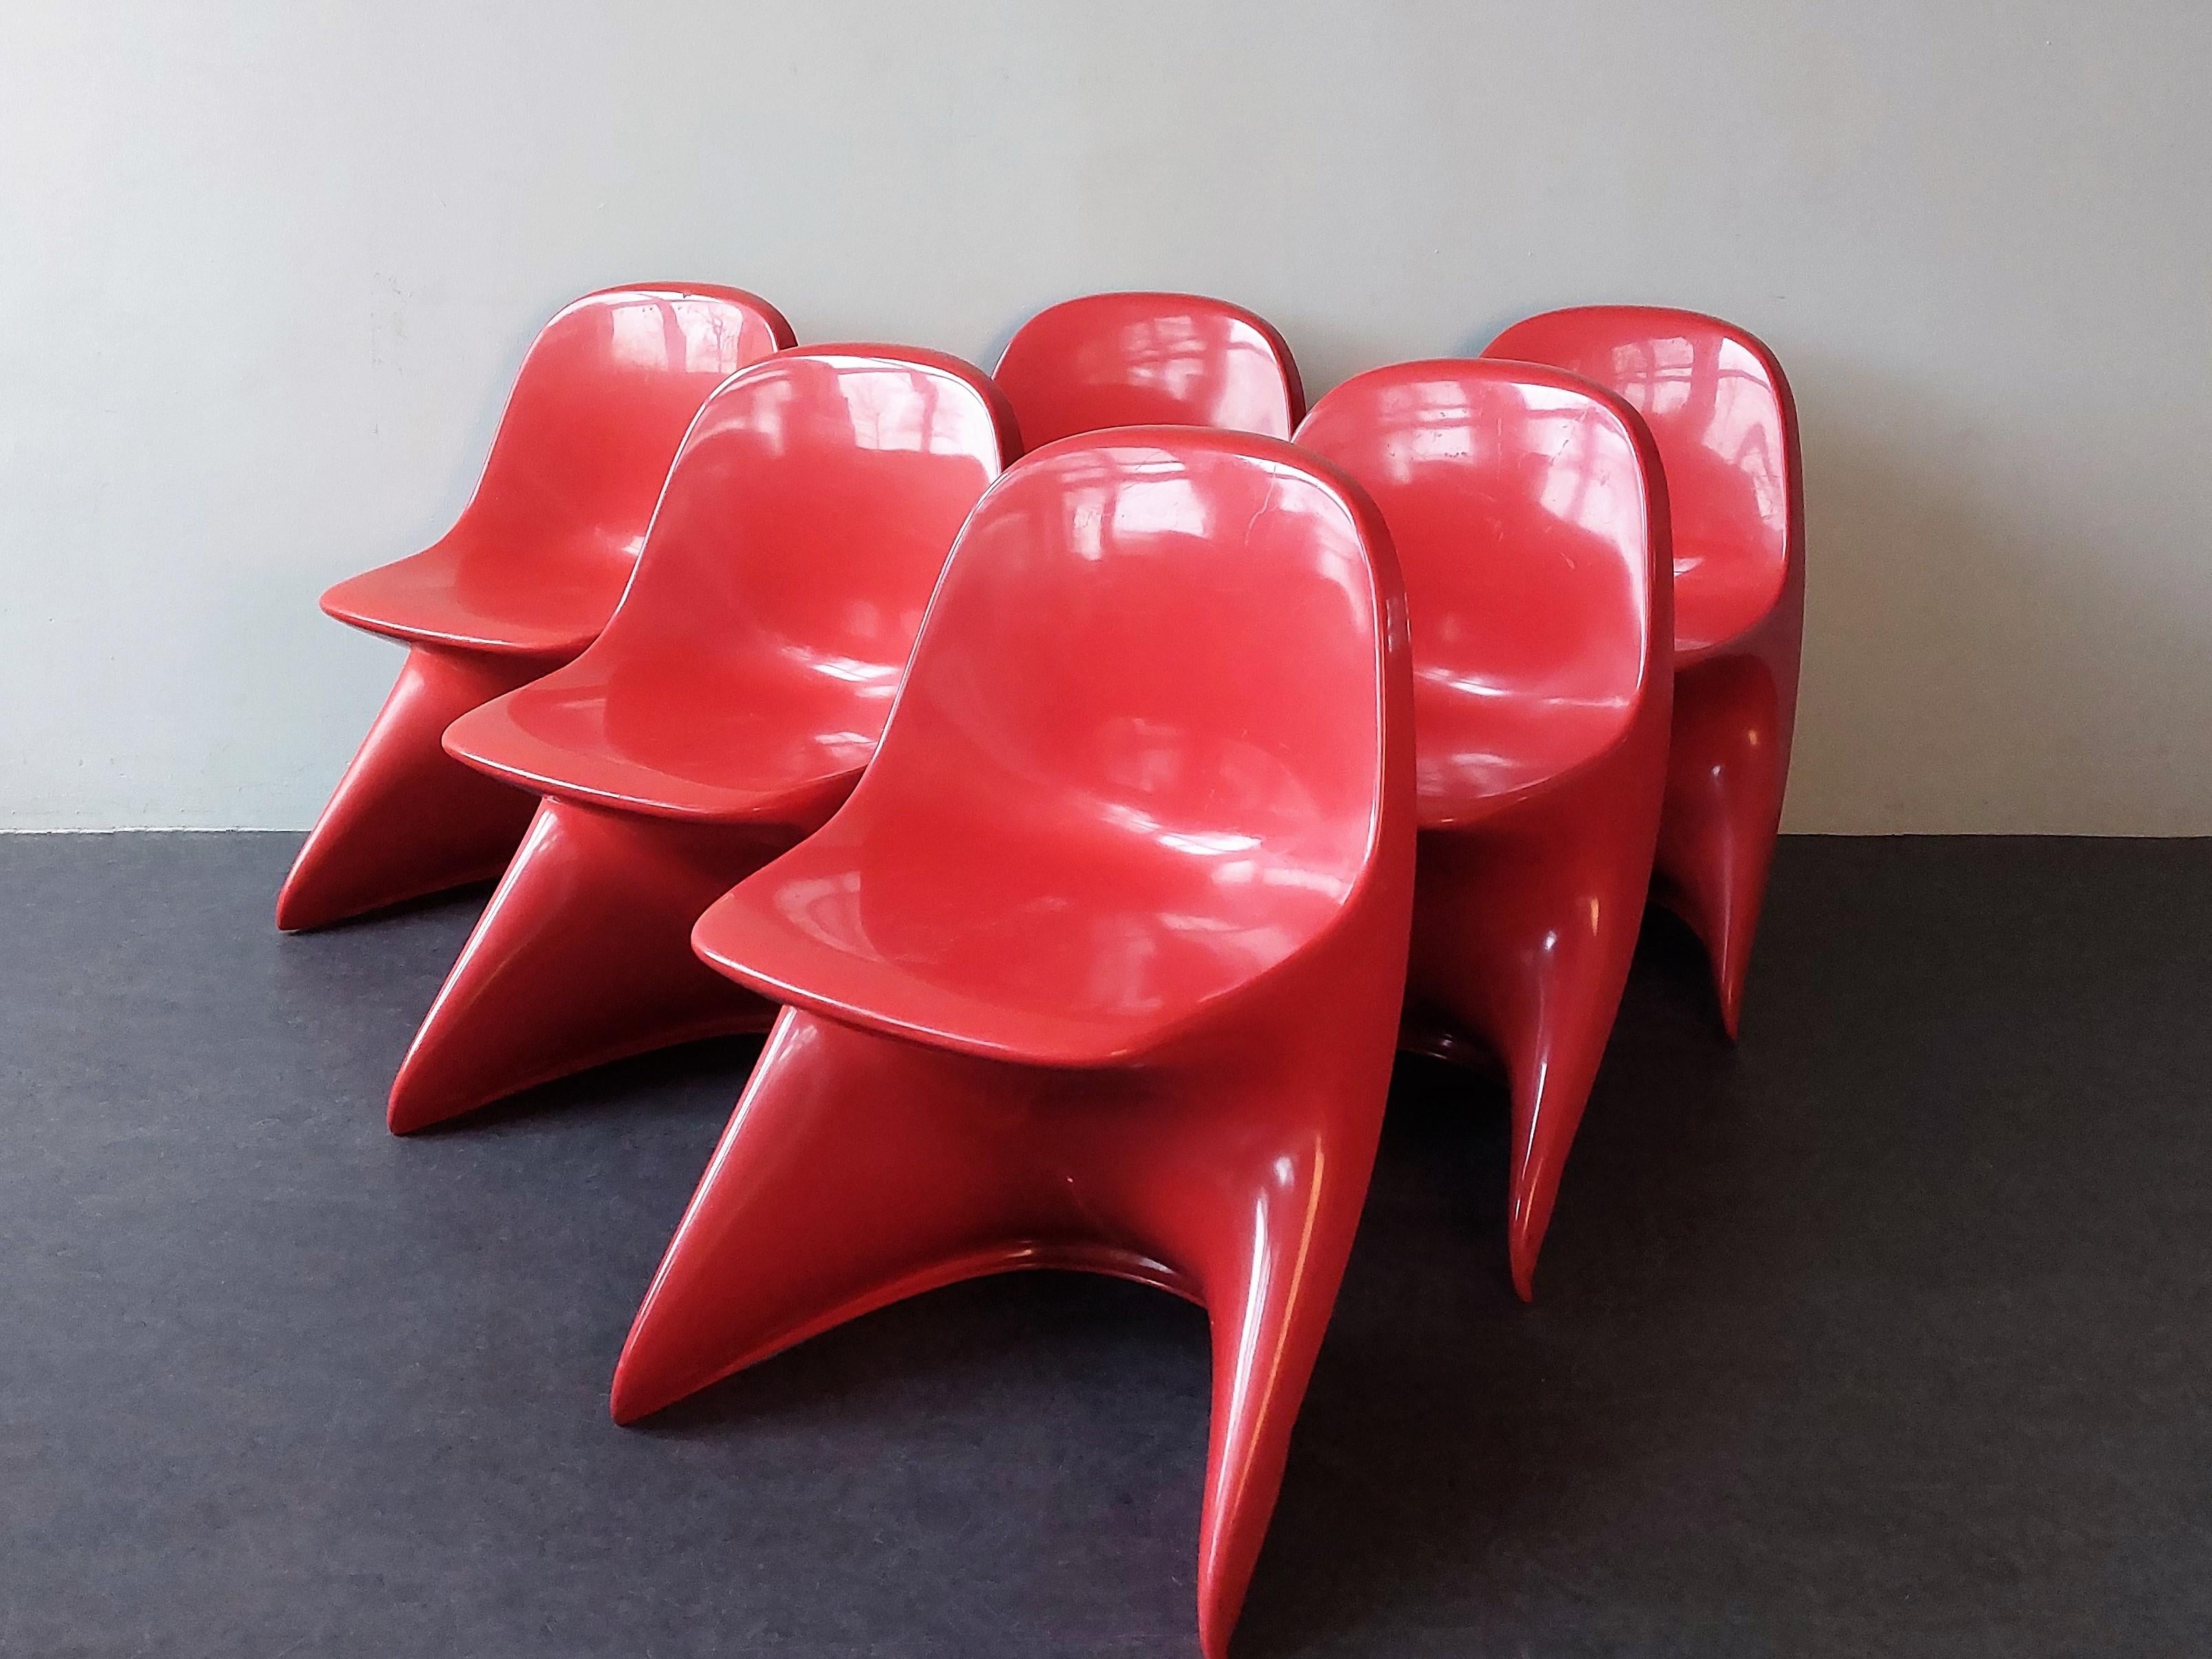 This iconic children's chair, model Casalino1, was designed by Alexander Begge for Casala in Italy in the 1970's. It is still just as popular 50 years on because of its unique and timeless shape. The chair is stackable and because of its plastic